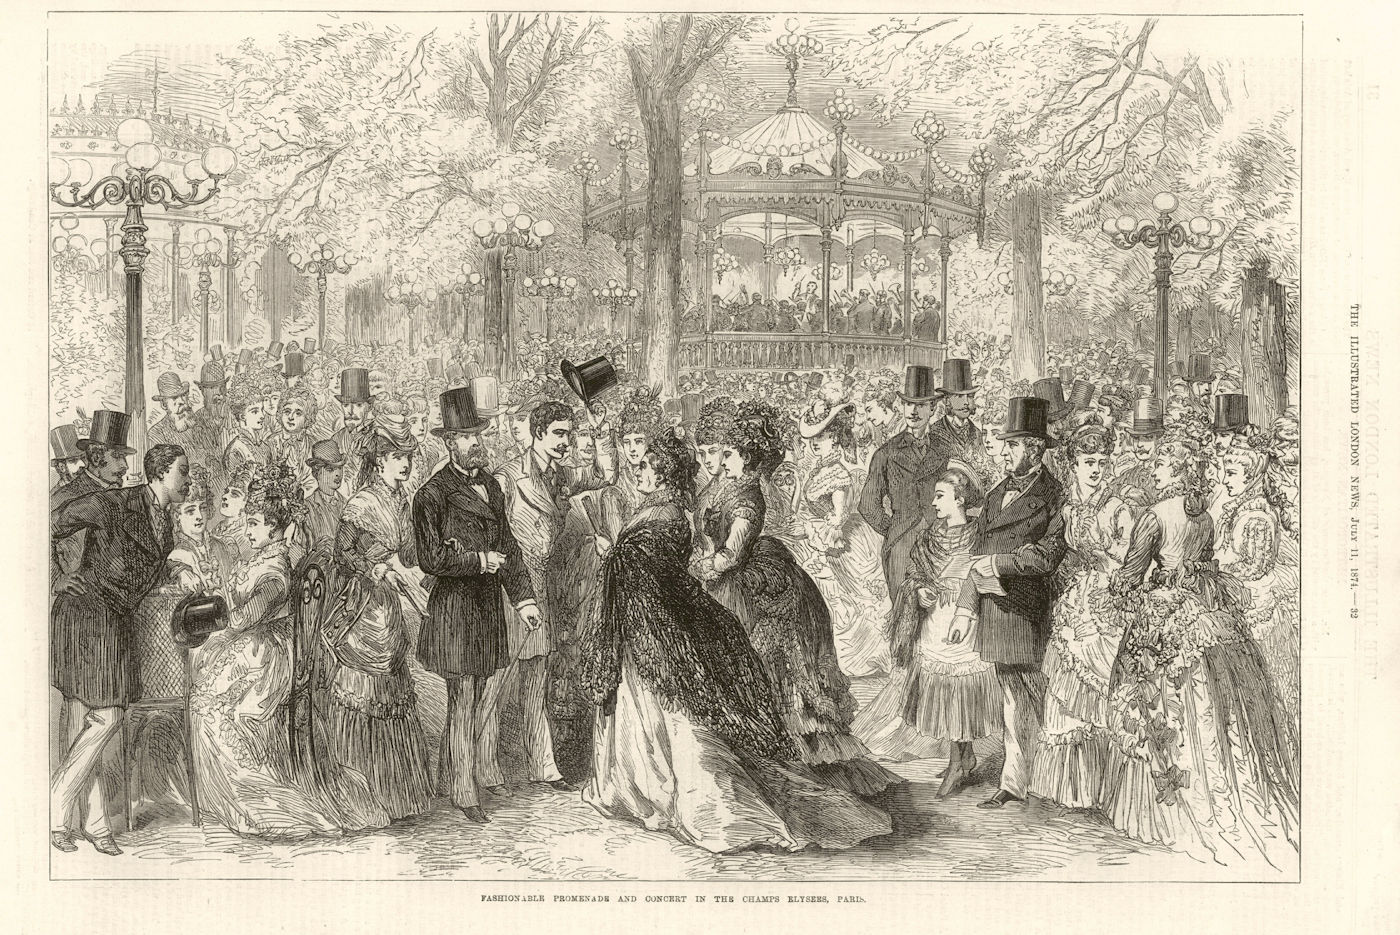 Associate Product Fashionable promenade & concert in the Champs Elysees, Paris. Bandstand 1874